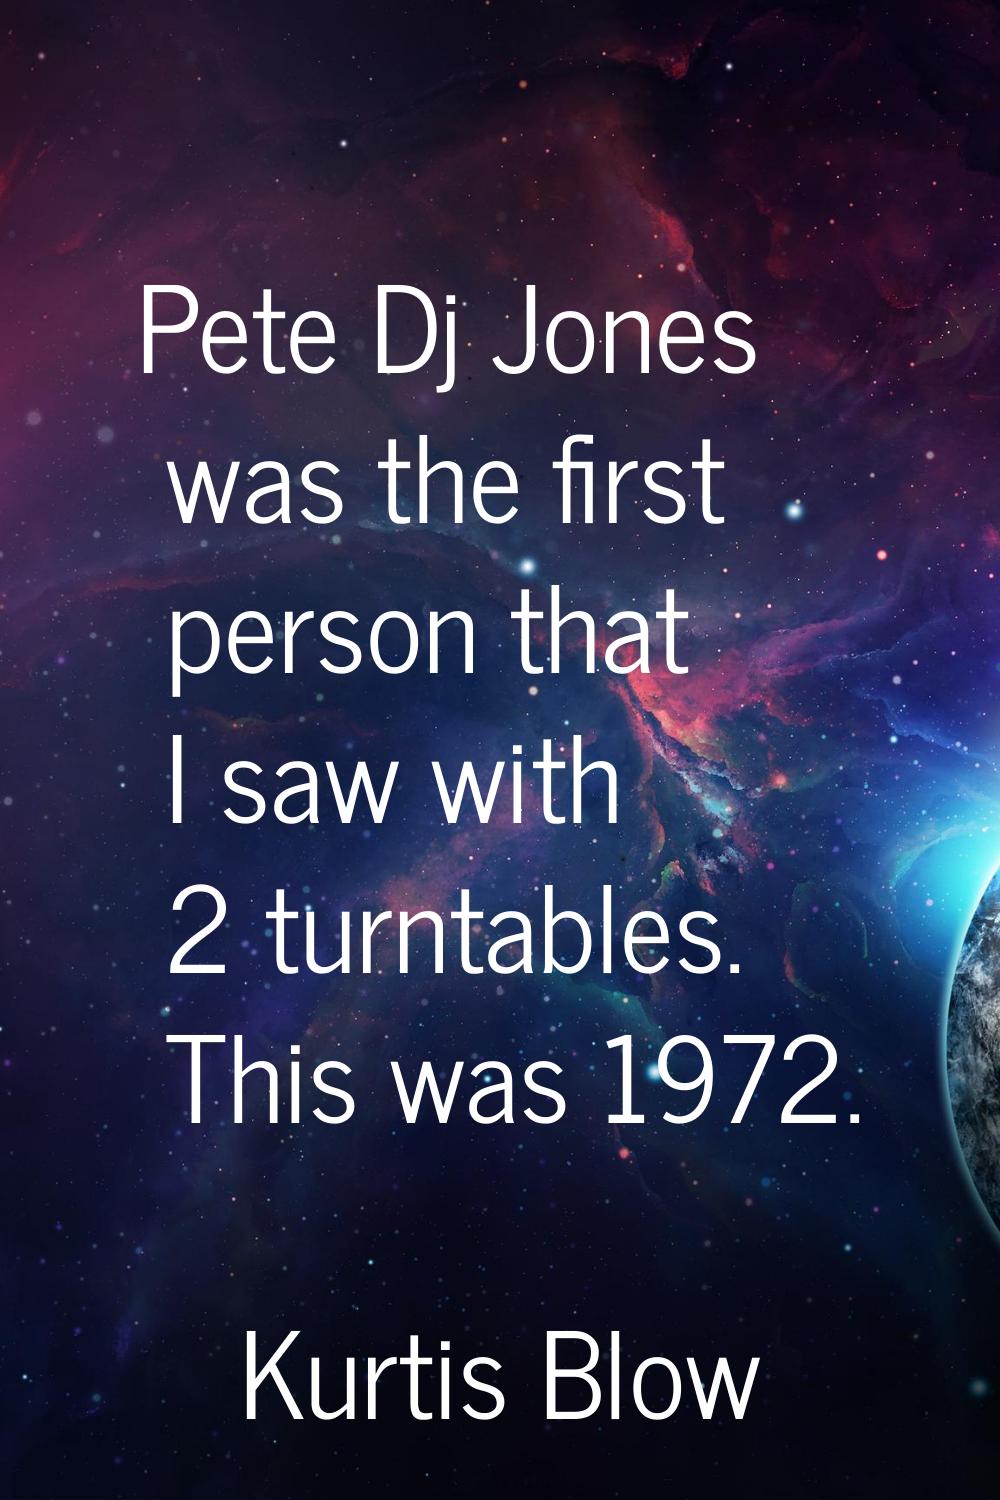 Pete Dj Jones was the first person that I saw with 2 turntables. This was 1972.